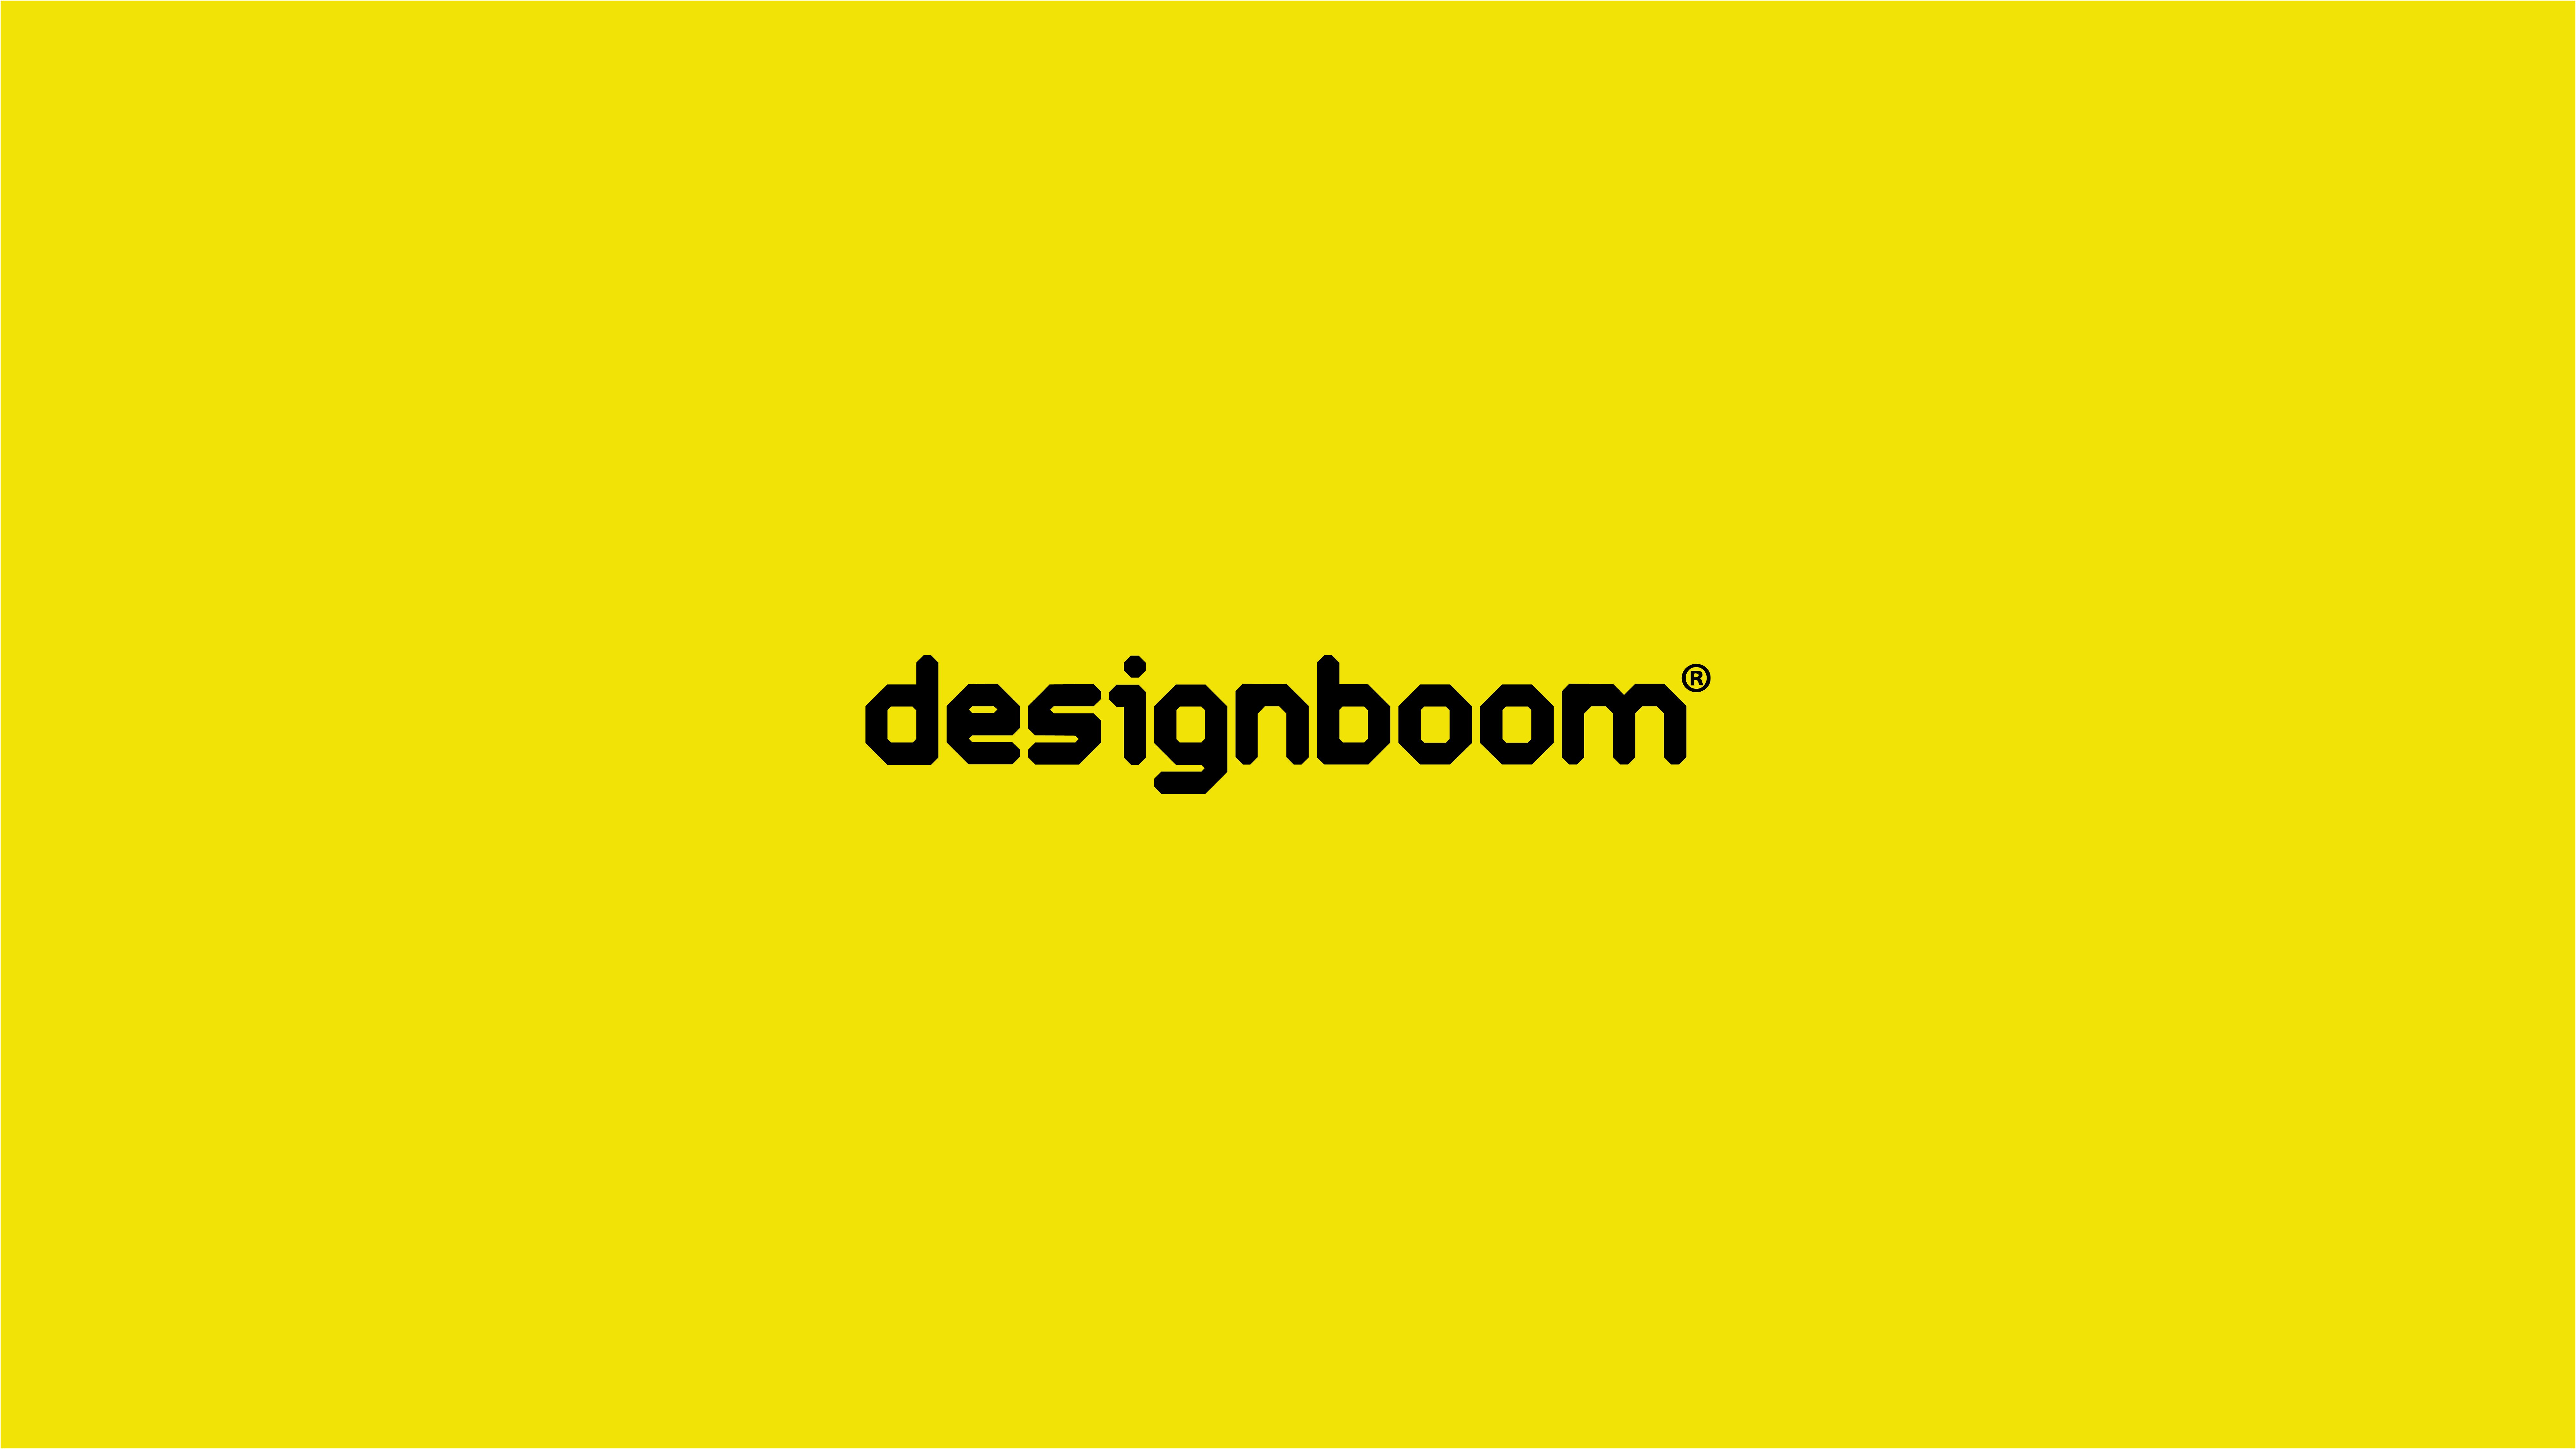 The word designboom on a yellow background